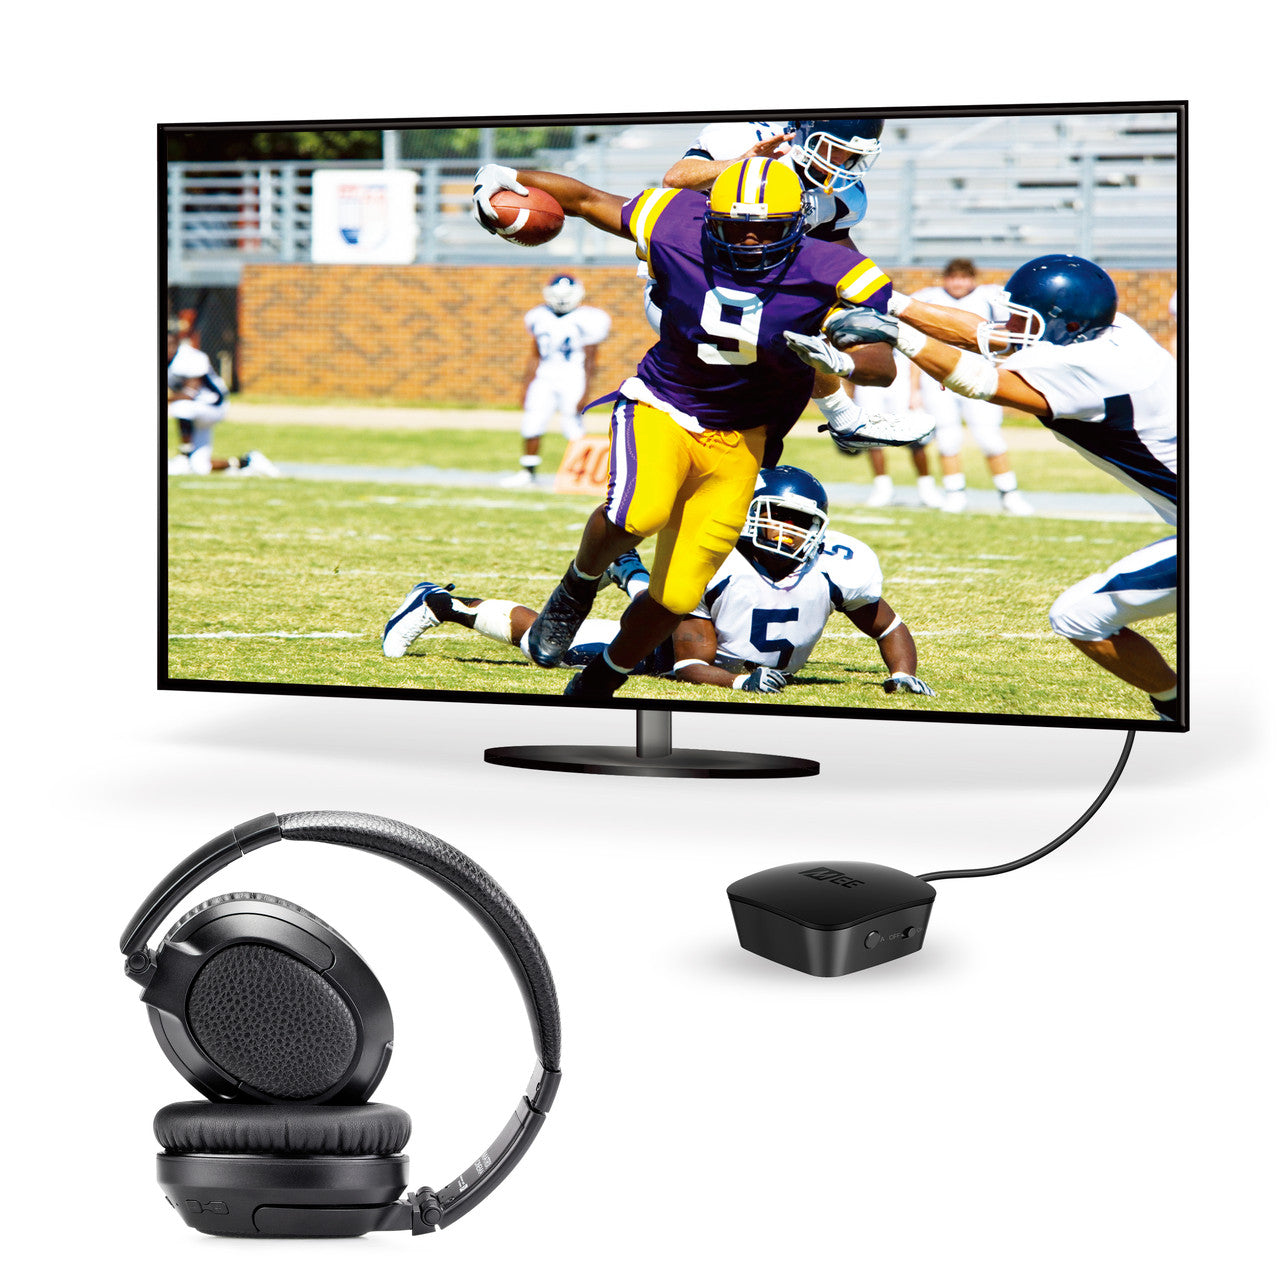 Image of Connect T1CMA Wireless Headphone System for TV - Includes Bluetooth Transmitter and Headphones.